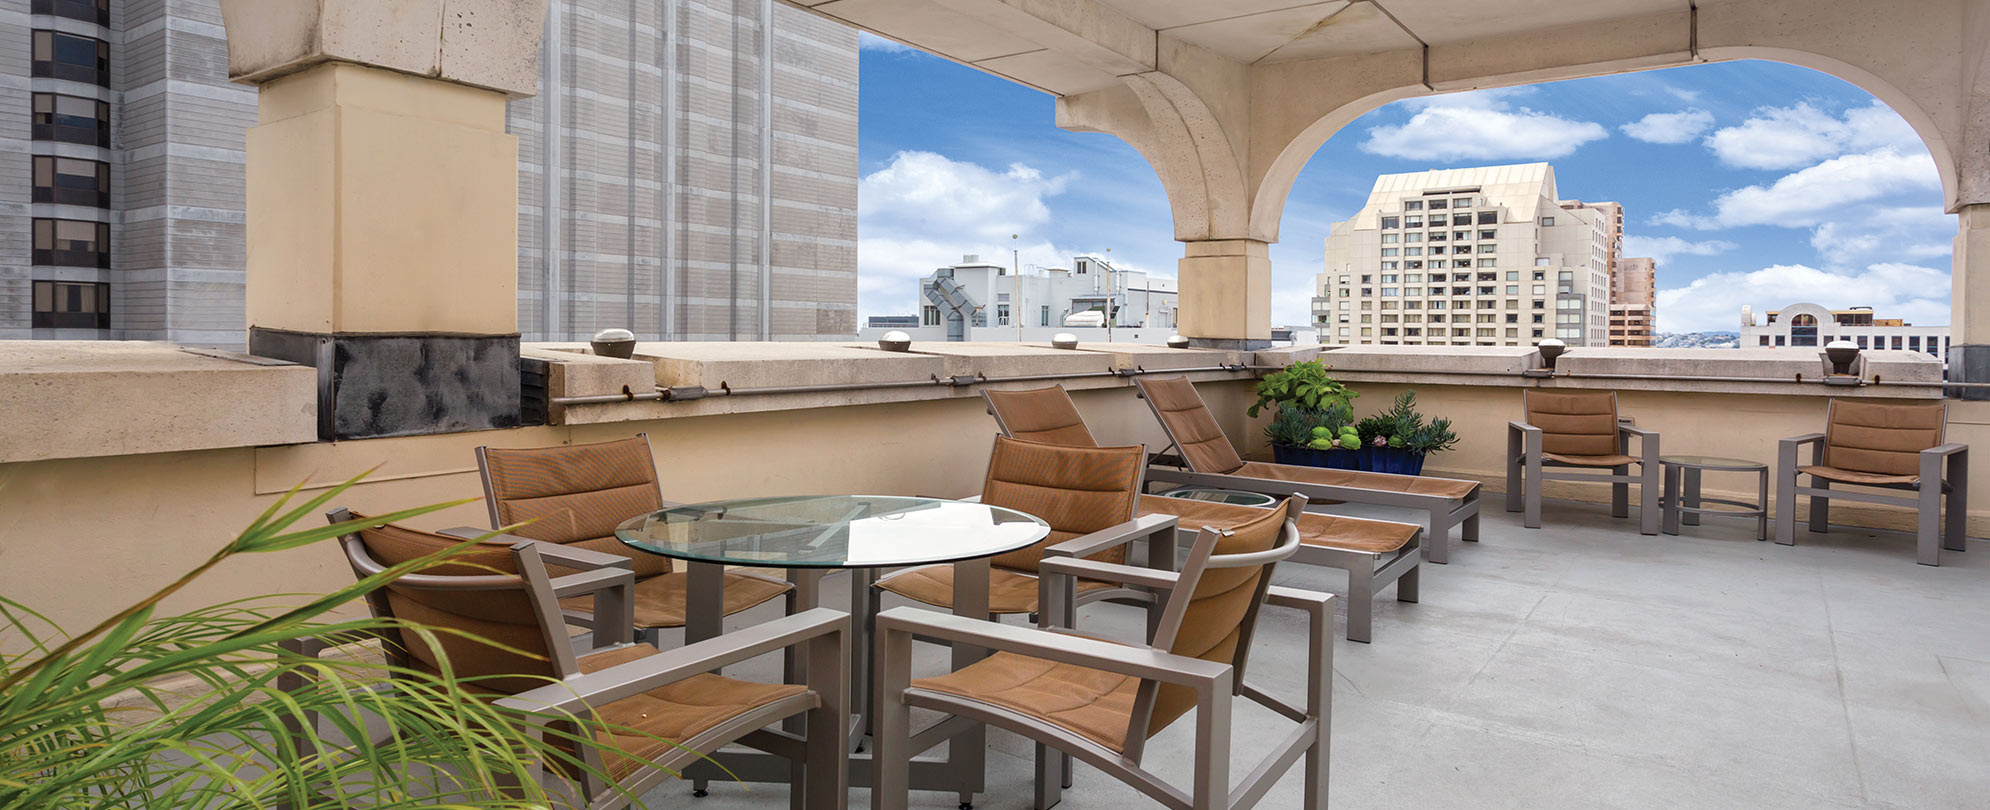 The rooftop patio of The Donatello Club Wyndham resort in San Francisco, California